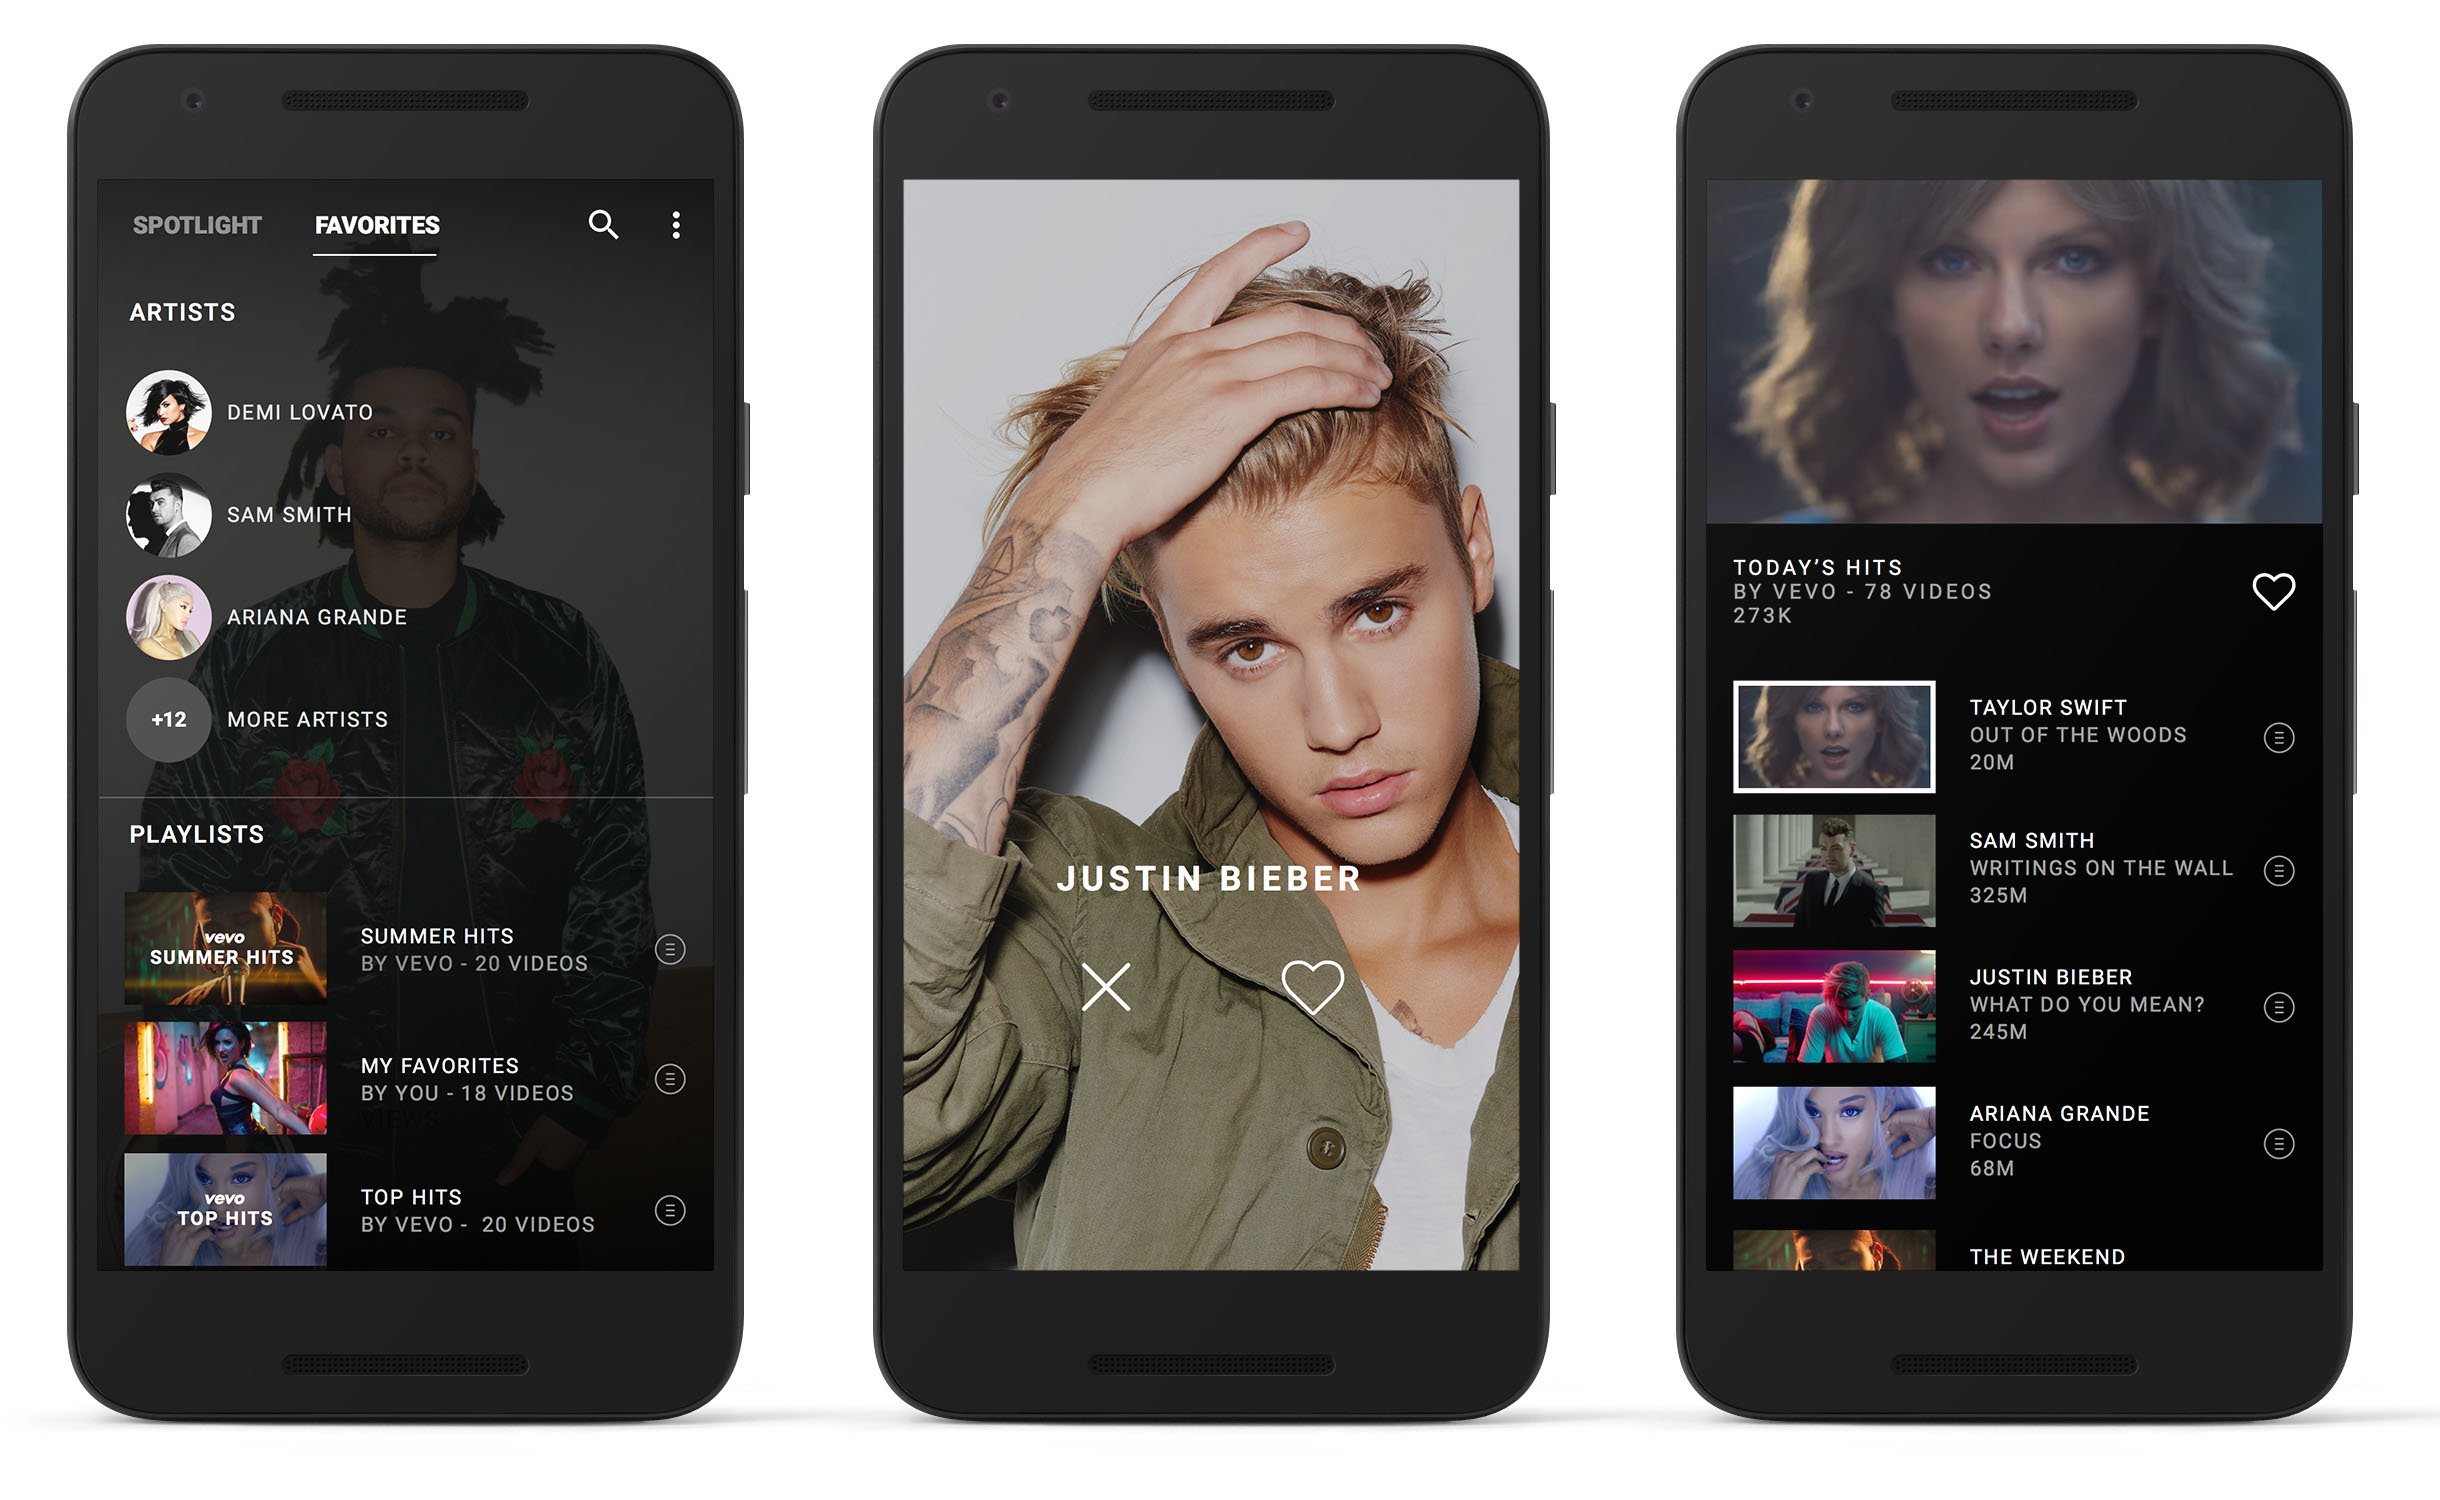 Vevo Integrating Spotify, YouTube and Twitter For Personalised Feeds